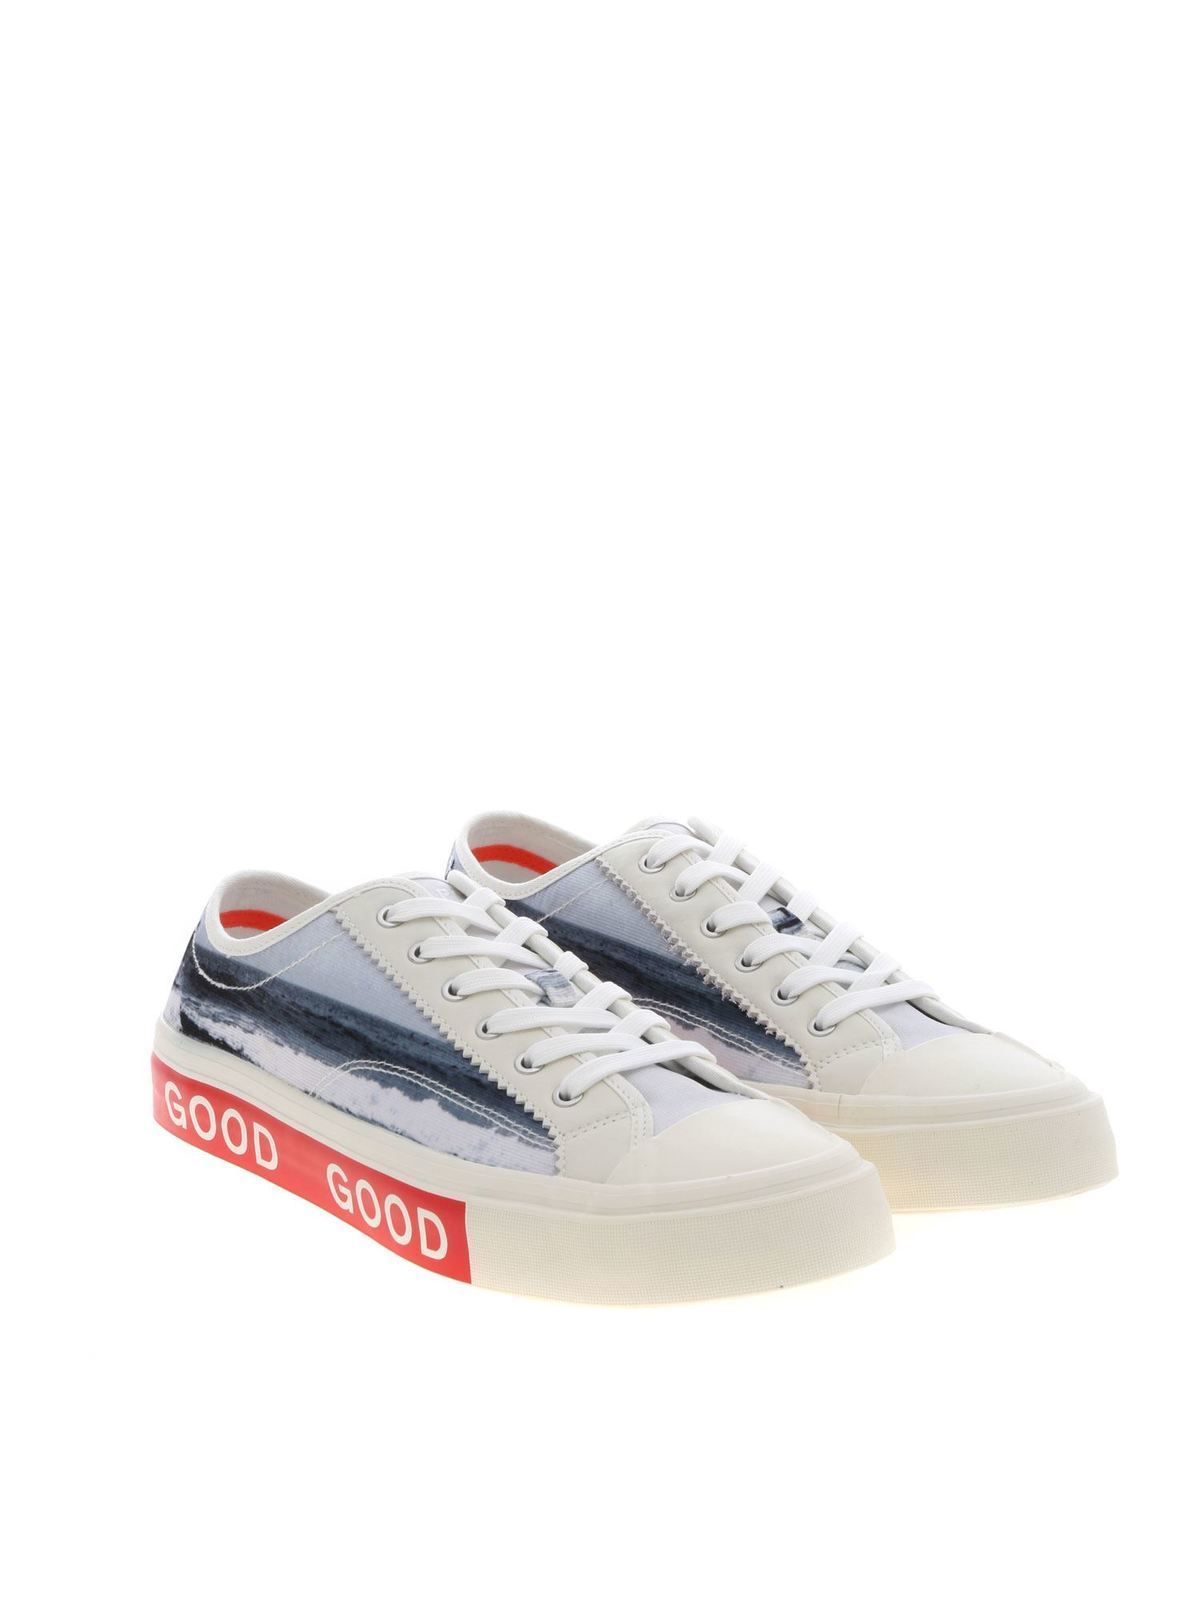 Kudde Stal Waardig Trainers Ps by Paul Smith - Fennec cream-colored sneakers - M2SFENO3ACVS70